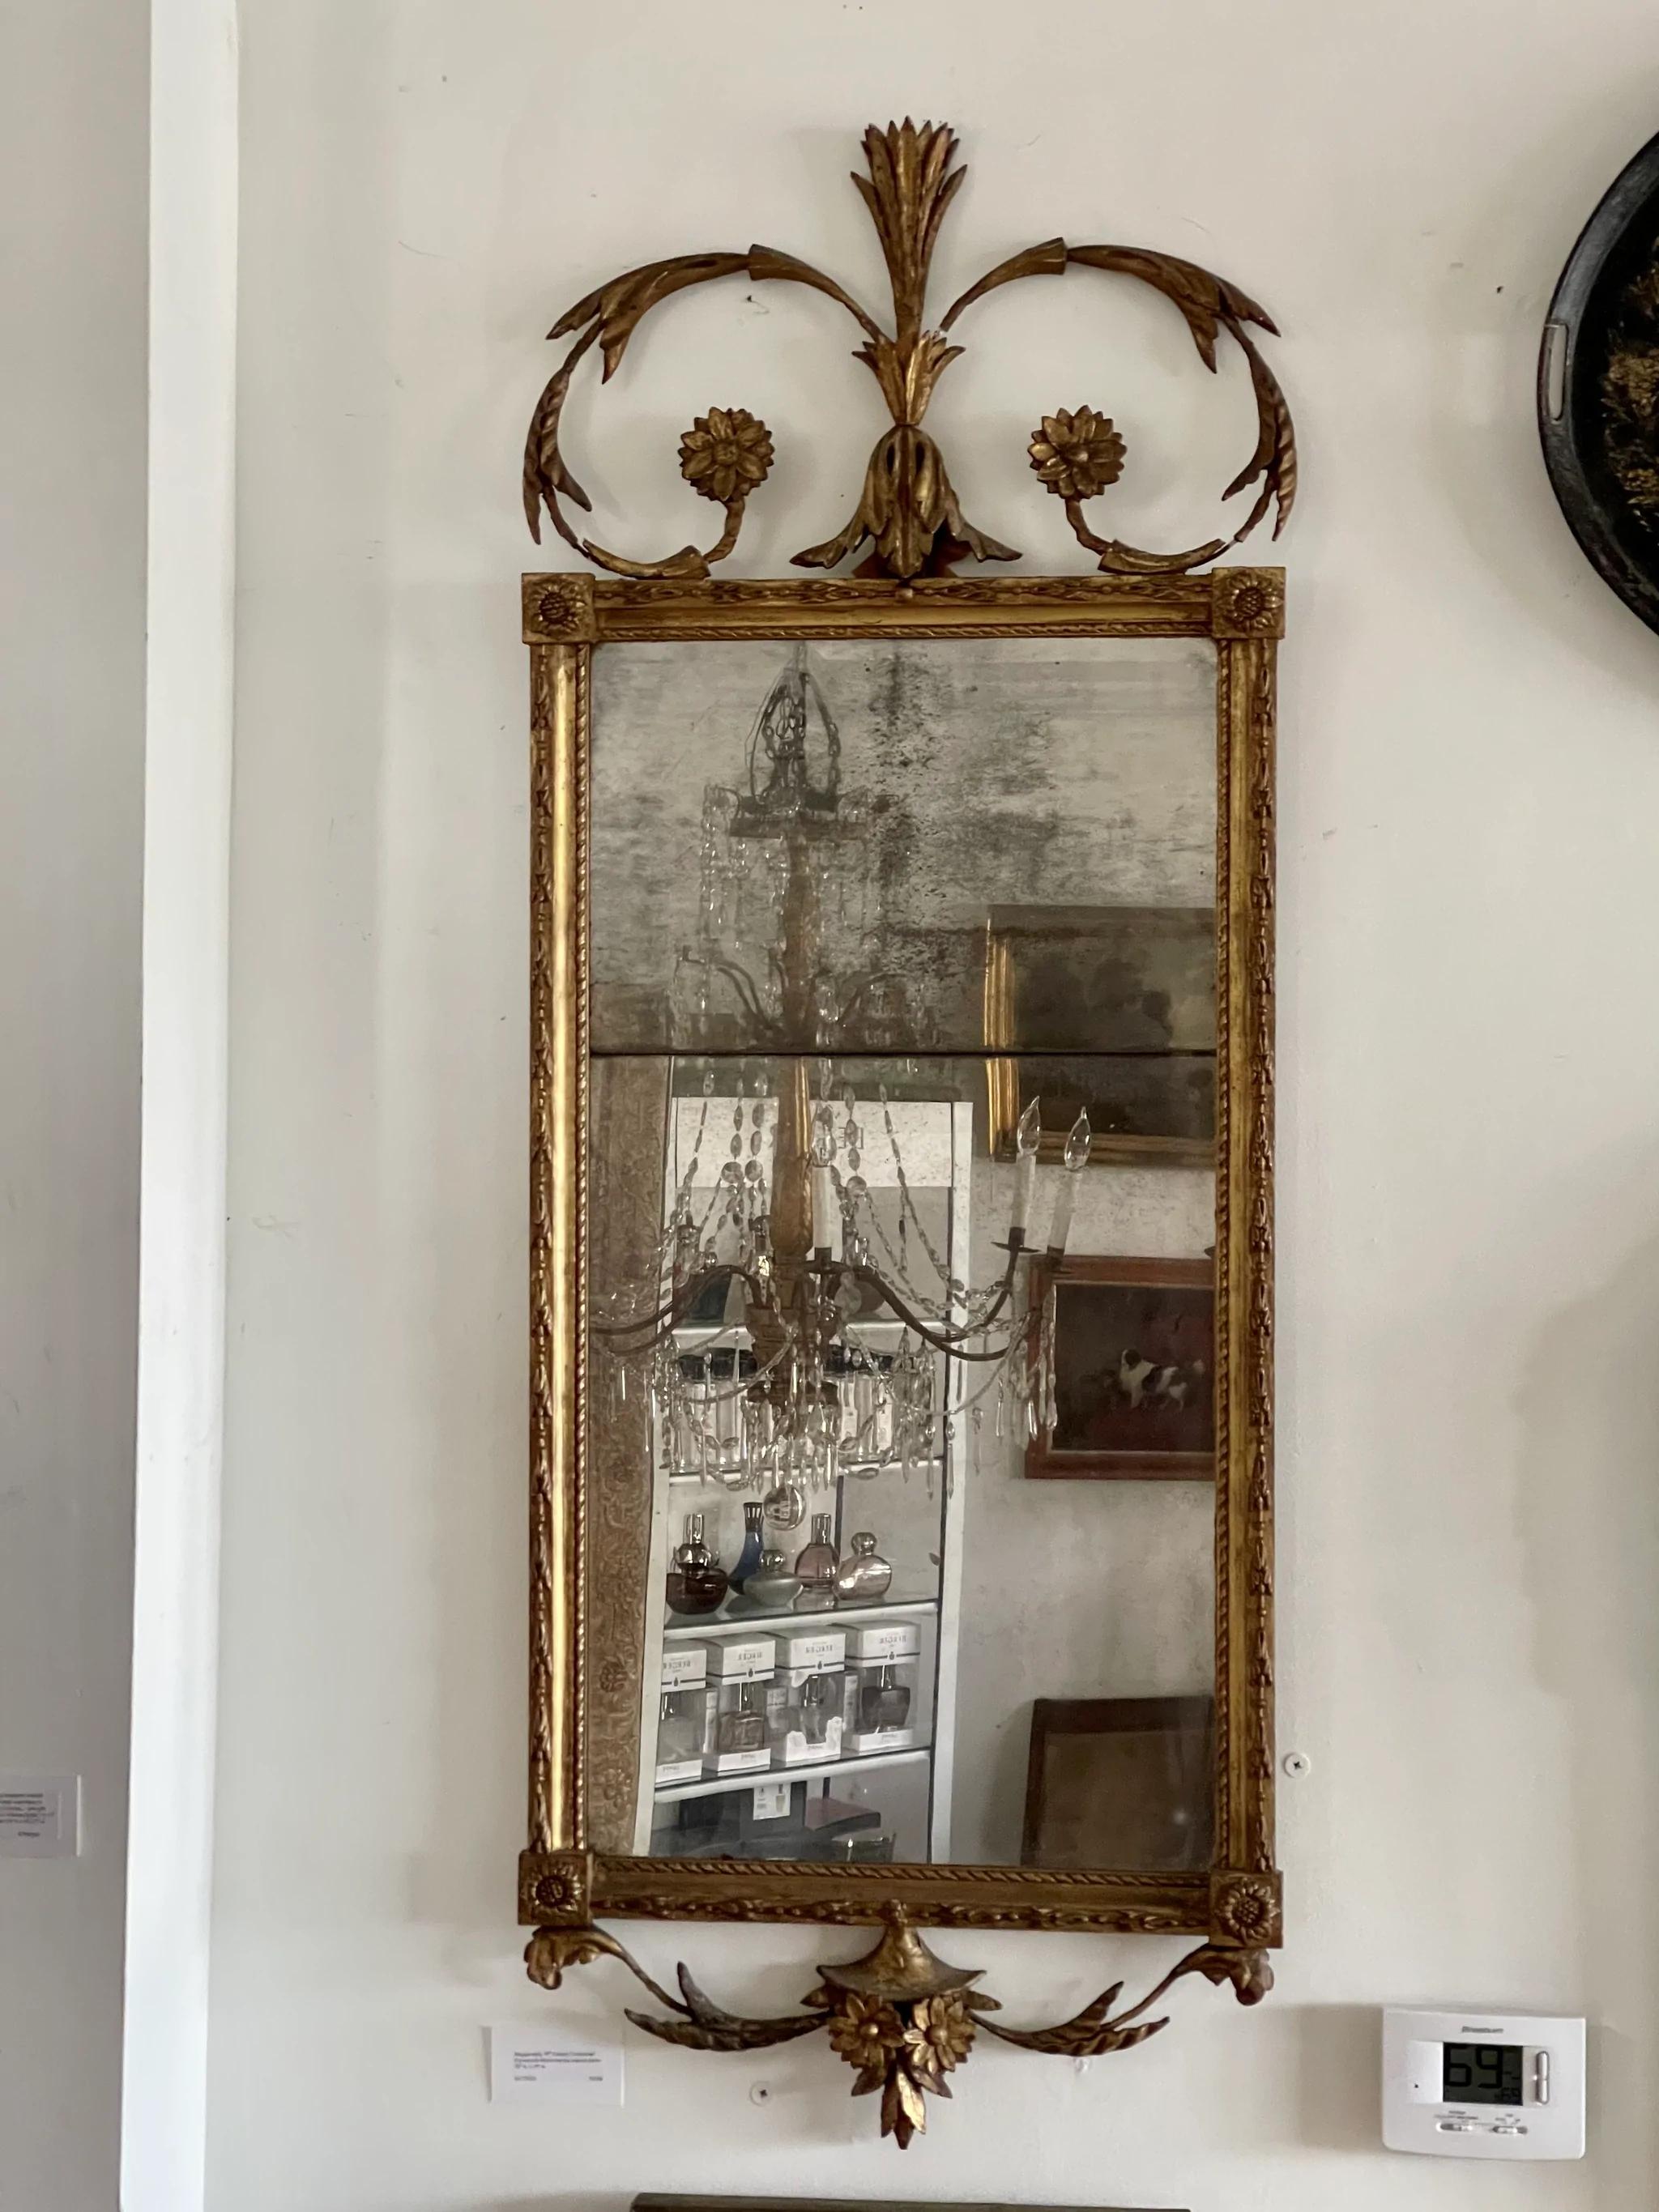 Elegant Continental Baroque Carved and gilded mirror,French or Italian, 18th century, well carved frame set with leaf, rocaille, and rosette ornament in deep relief, rectangular mirror plate.